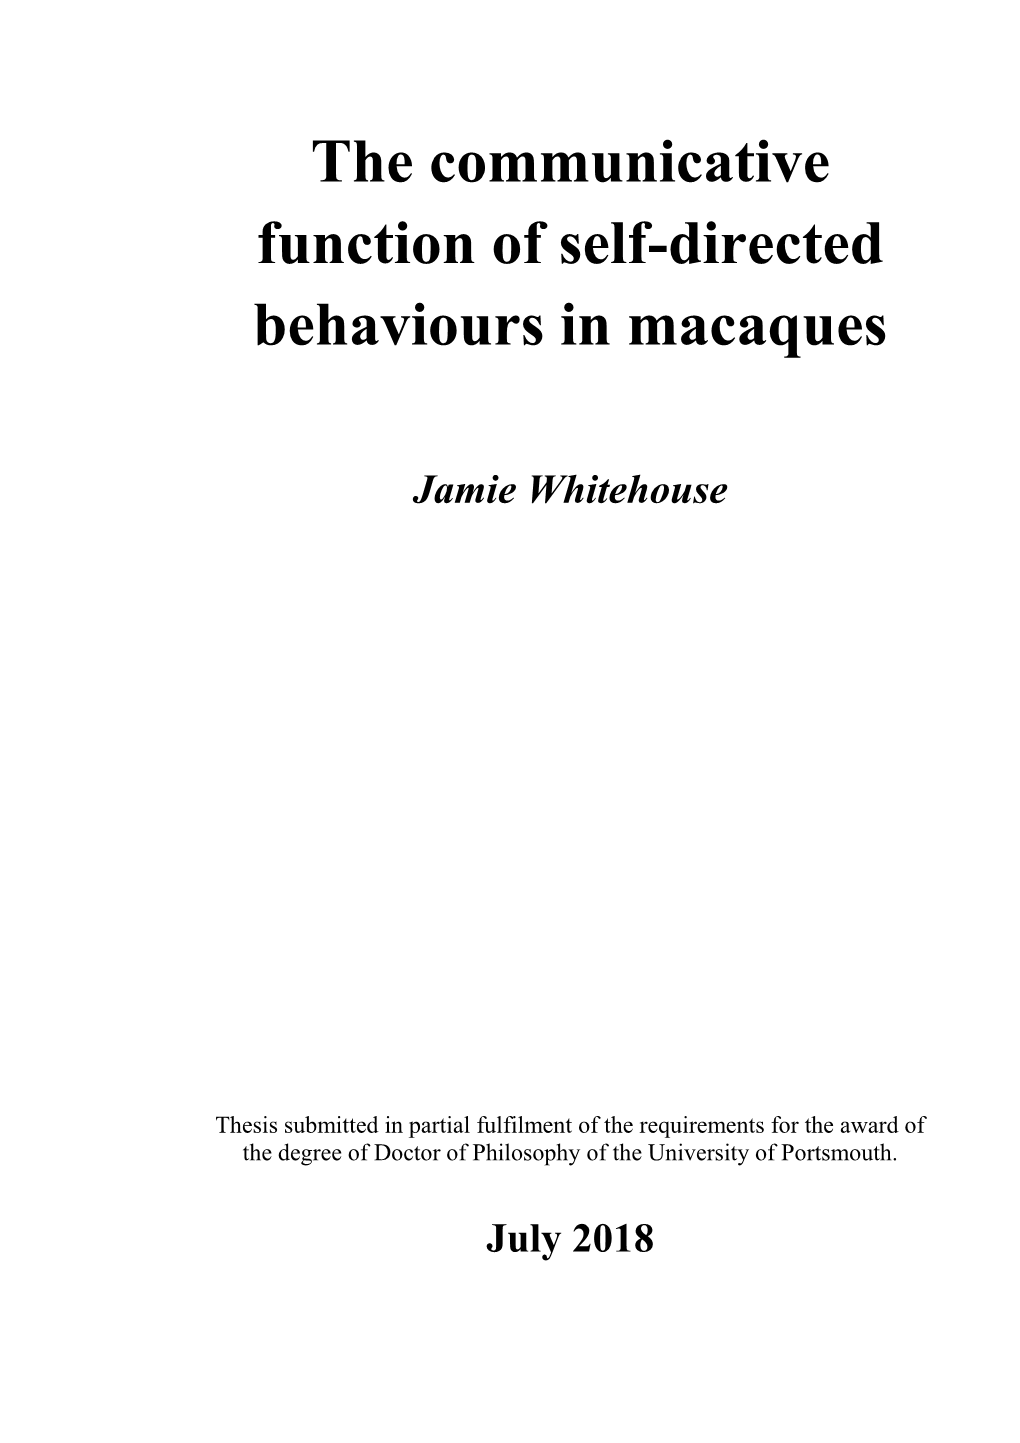 The Communicative Function of Self-Directed Behaviours in Macaques